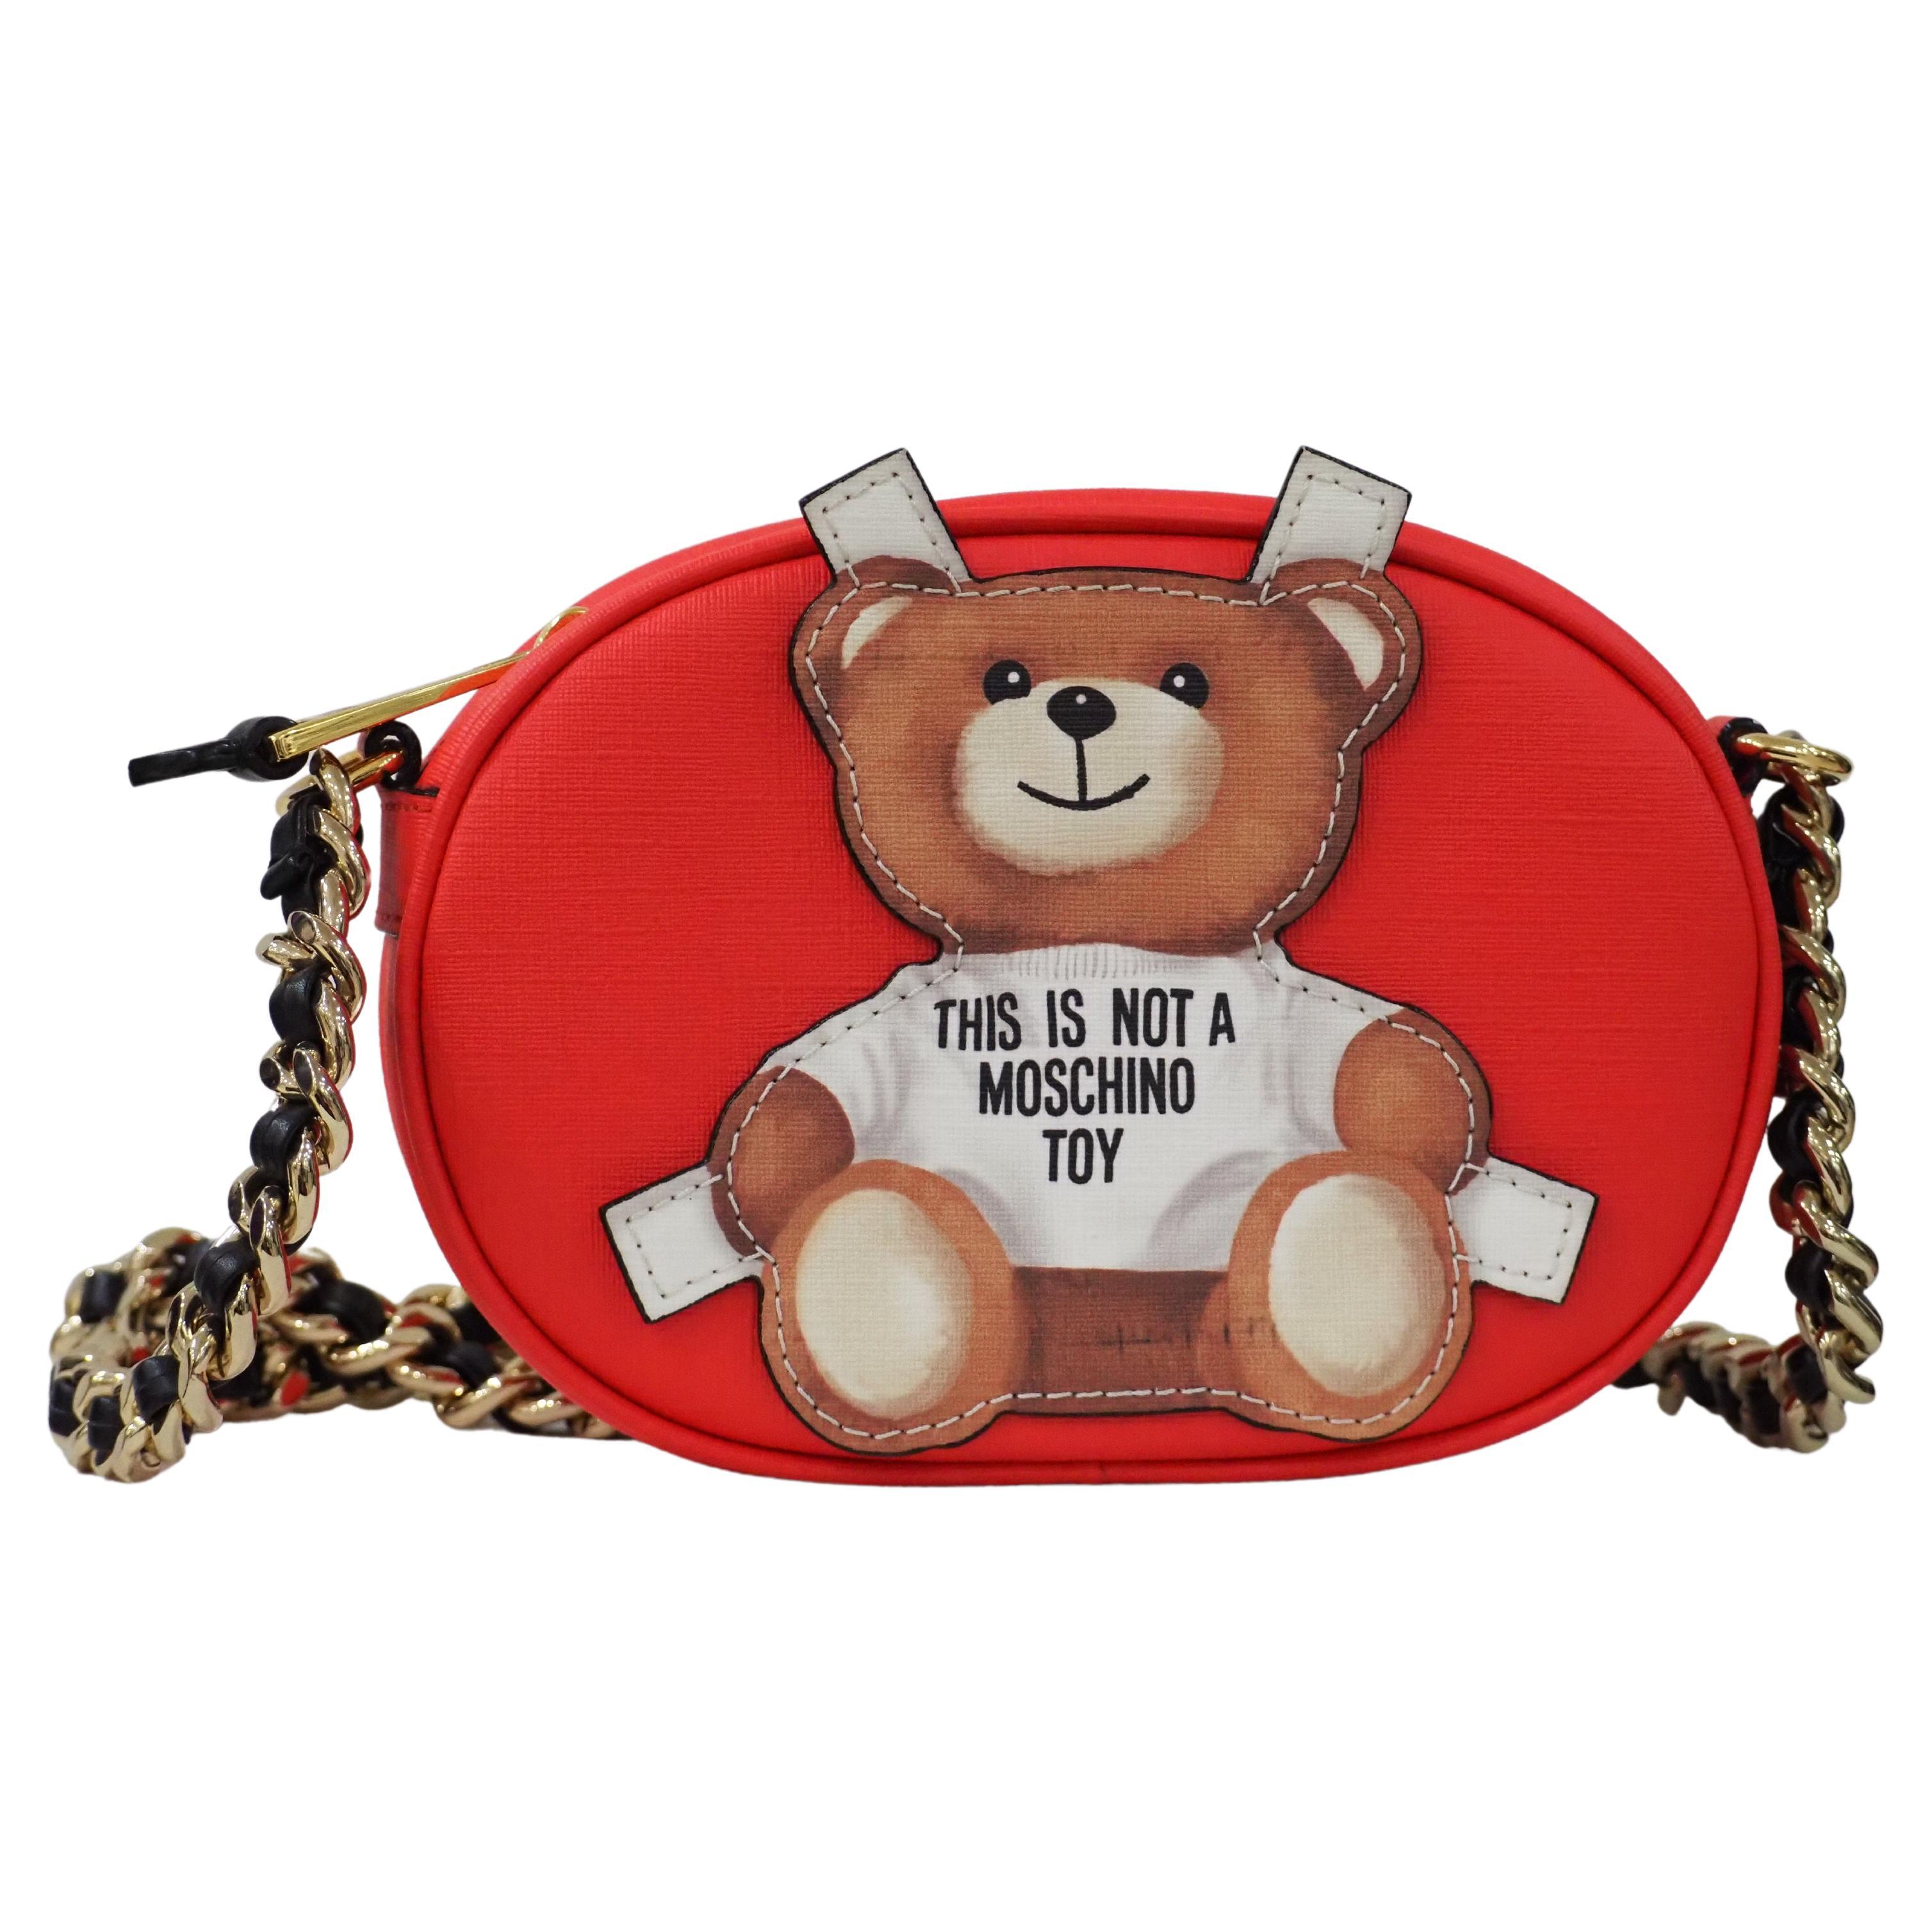 Moschino This is not a Moschino Toy red leather shoulder bag